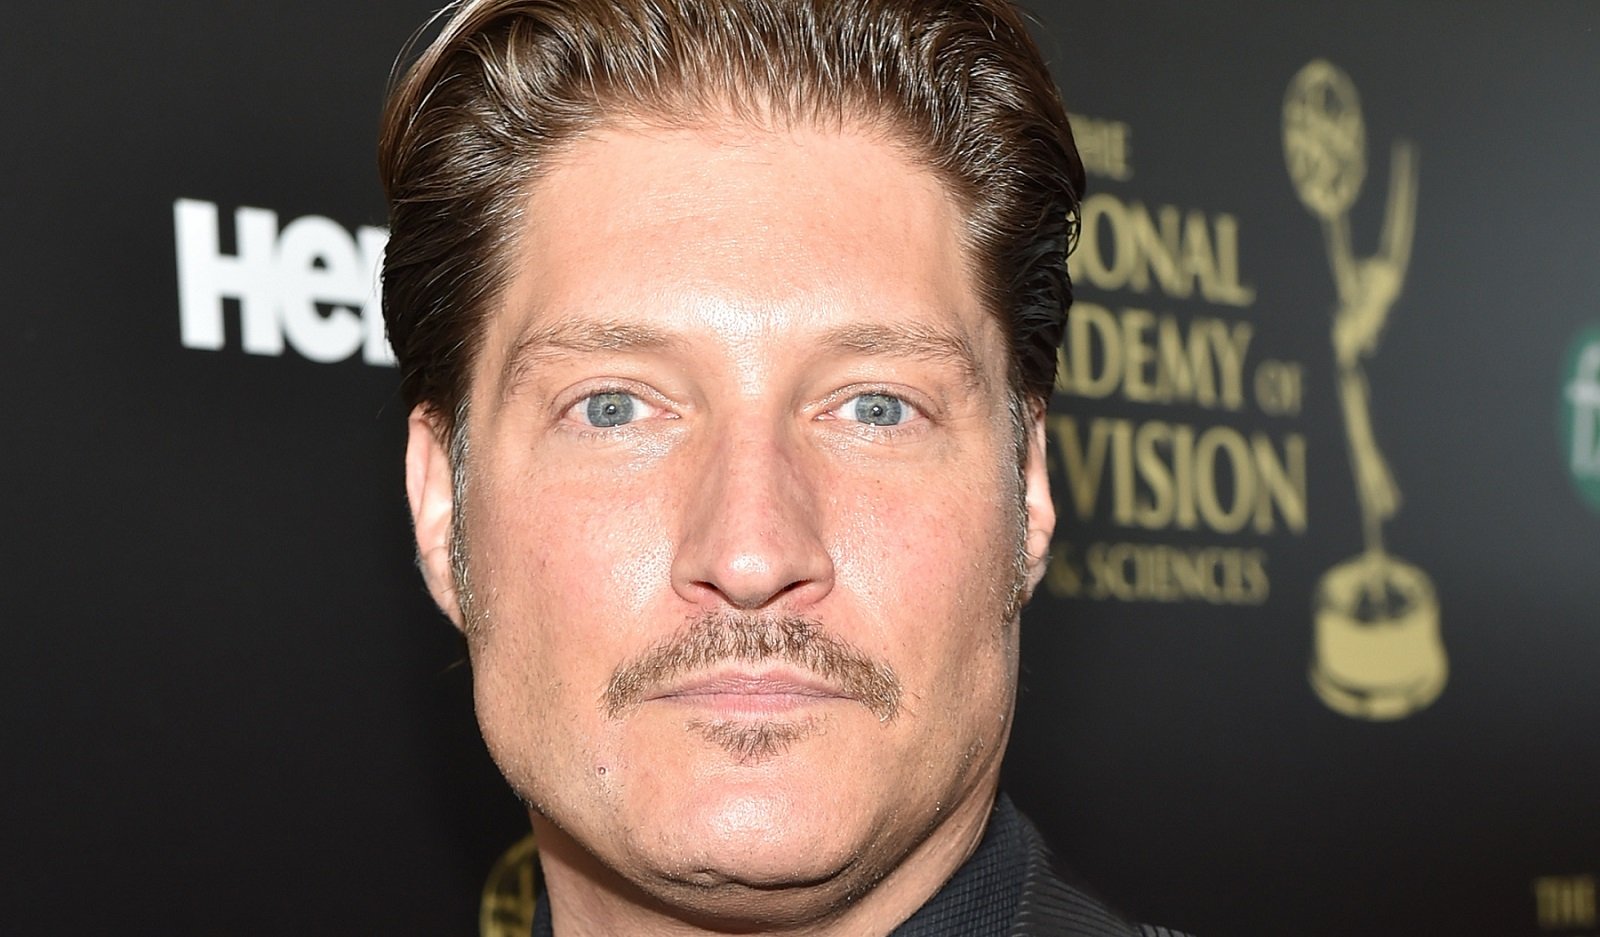 The Bold and the Beautiful star Sean Kanan as Deacon